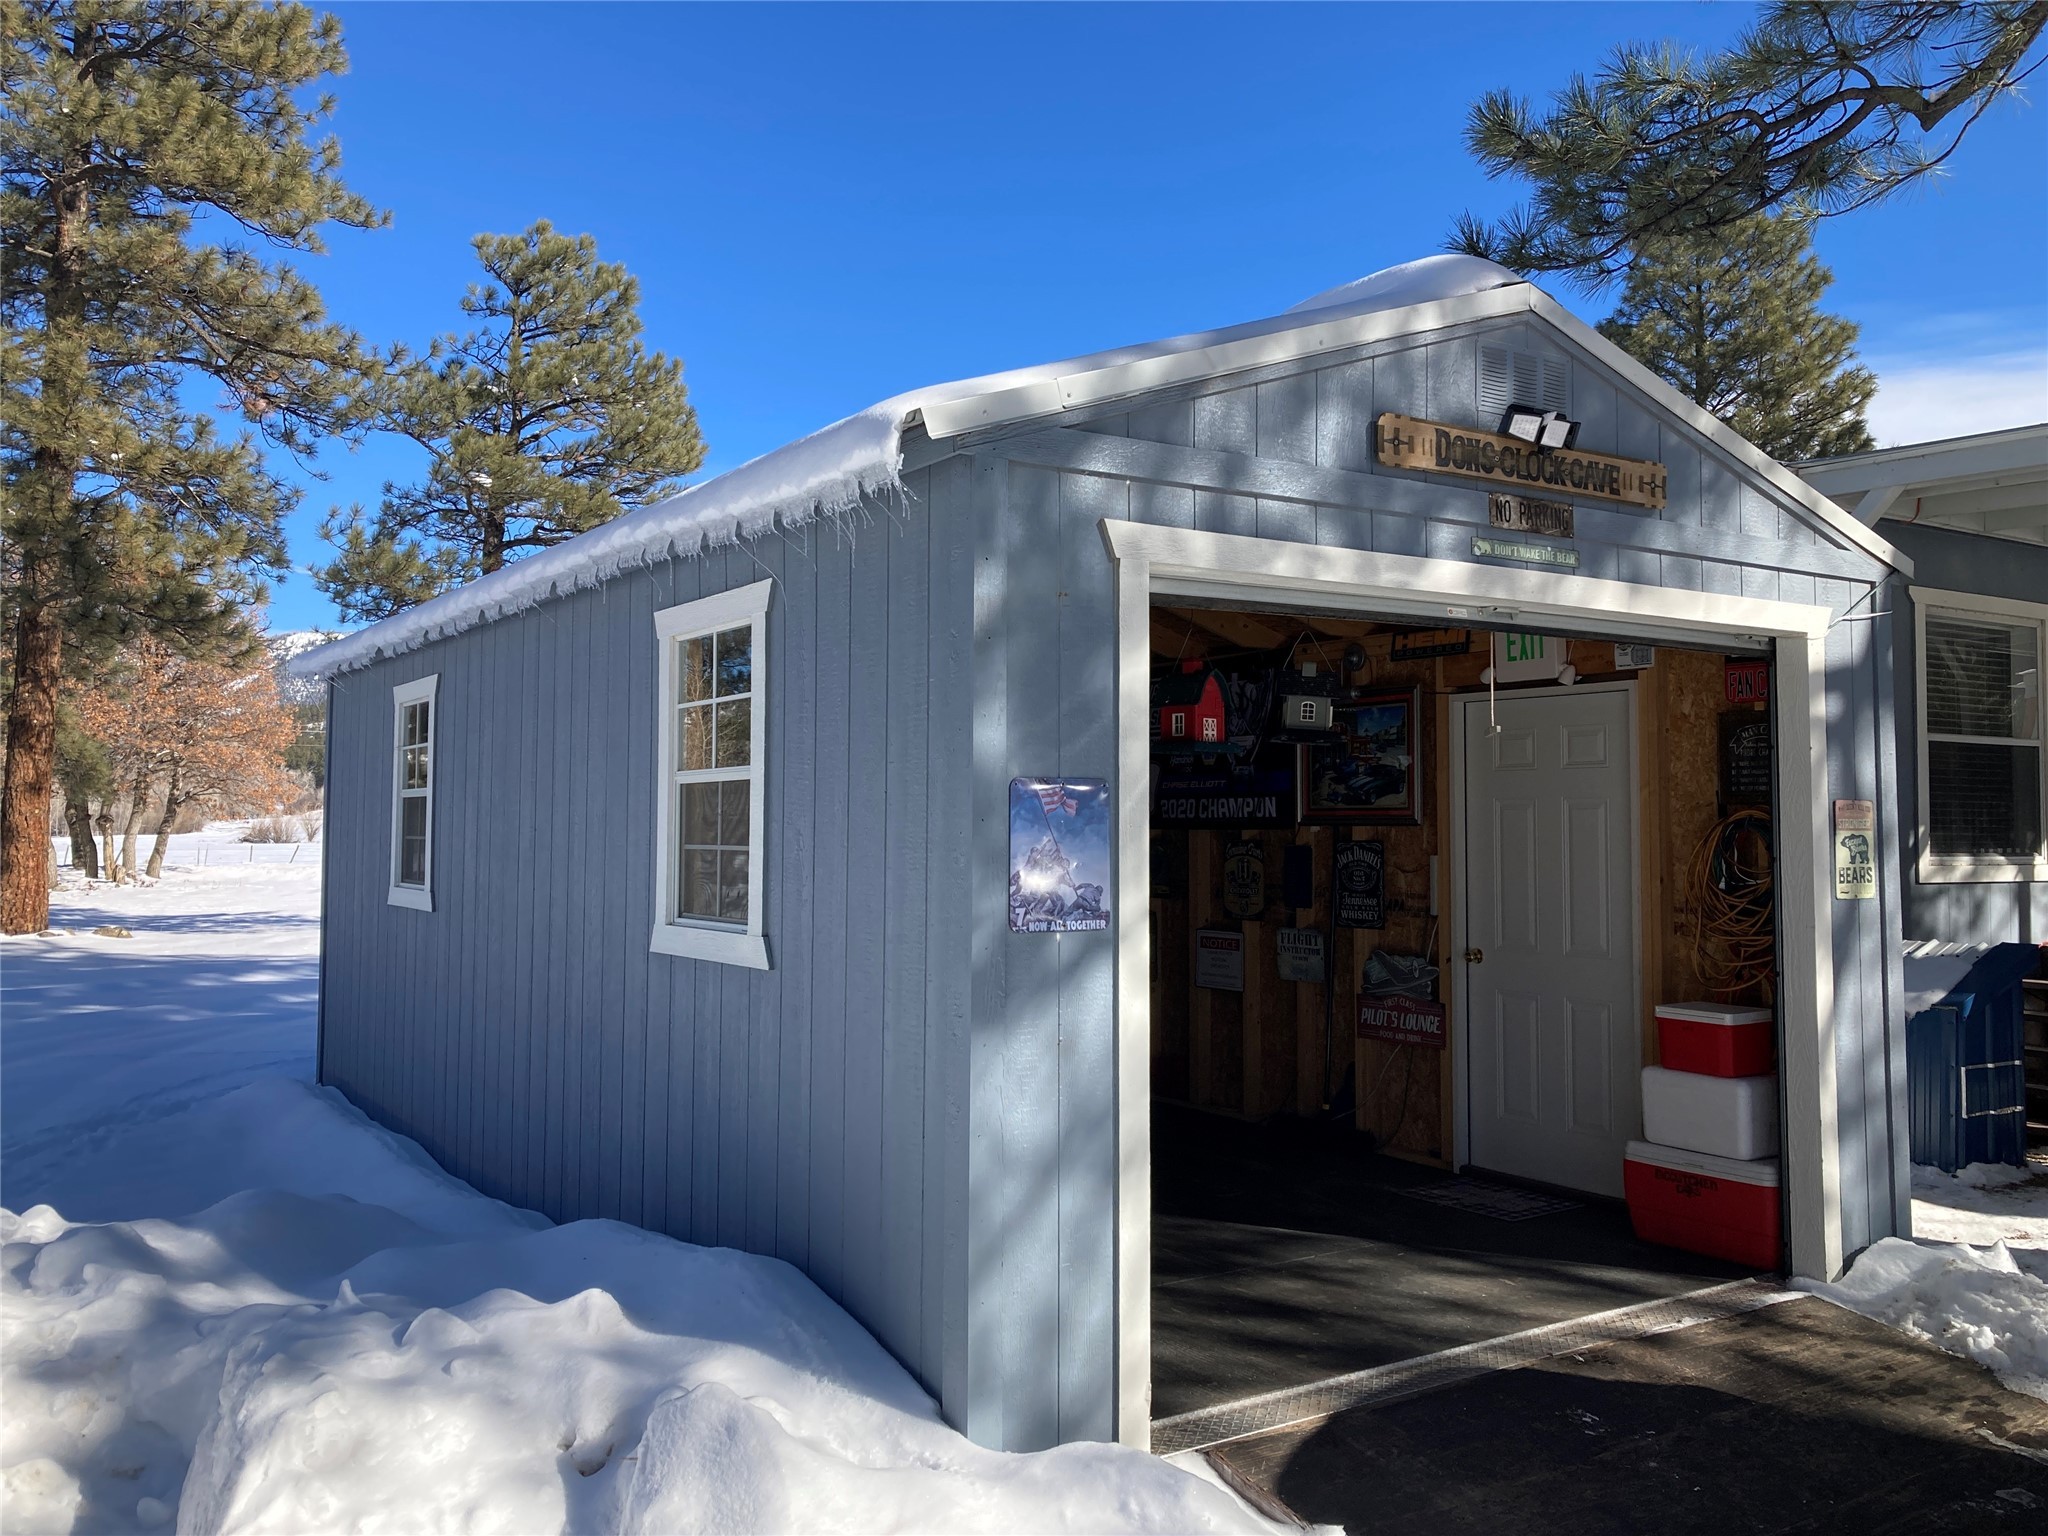 406 State Road 512, Chama, New Mexico 87520, 3 Bedrooms Bedrooms, ,2 BathroomsBathrooms,Residential,For Sale,406 State Road 512,202234420